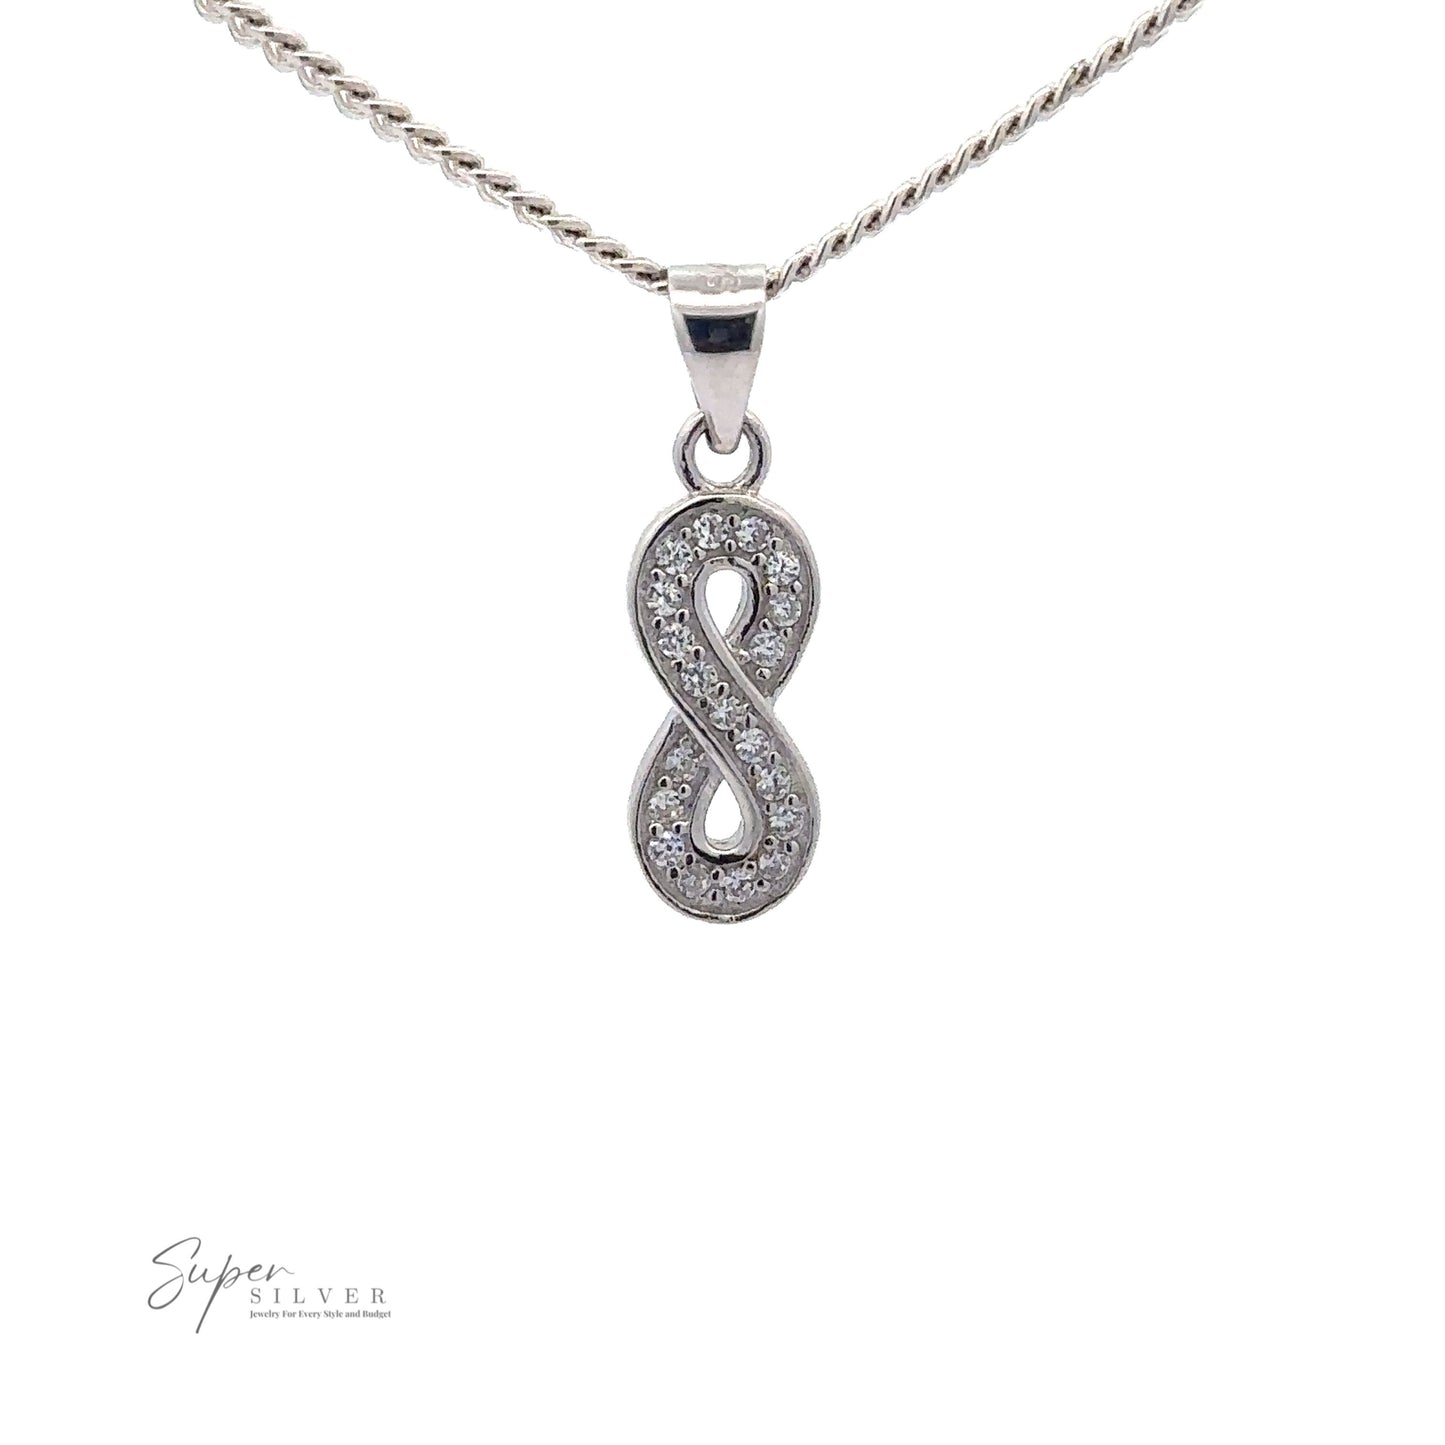 A Cubic Zirconia Infinity Pendant encrusted with small cubic zirconia gemstones, hanging from a silver chain. The logo "Super Silver" is visible in the bottom left corner.